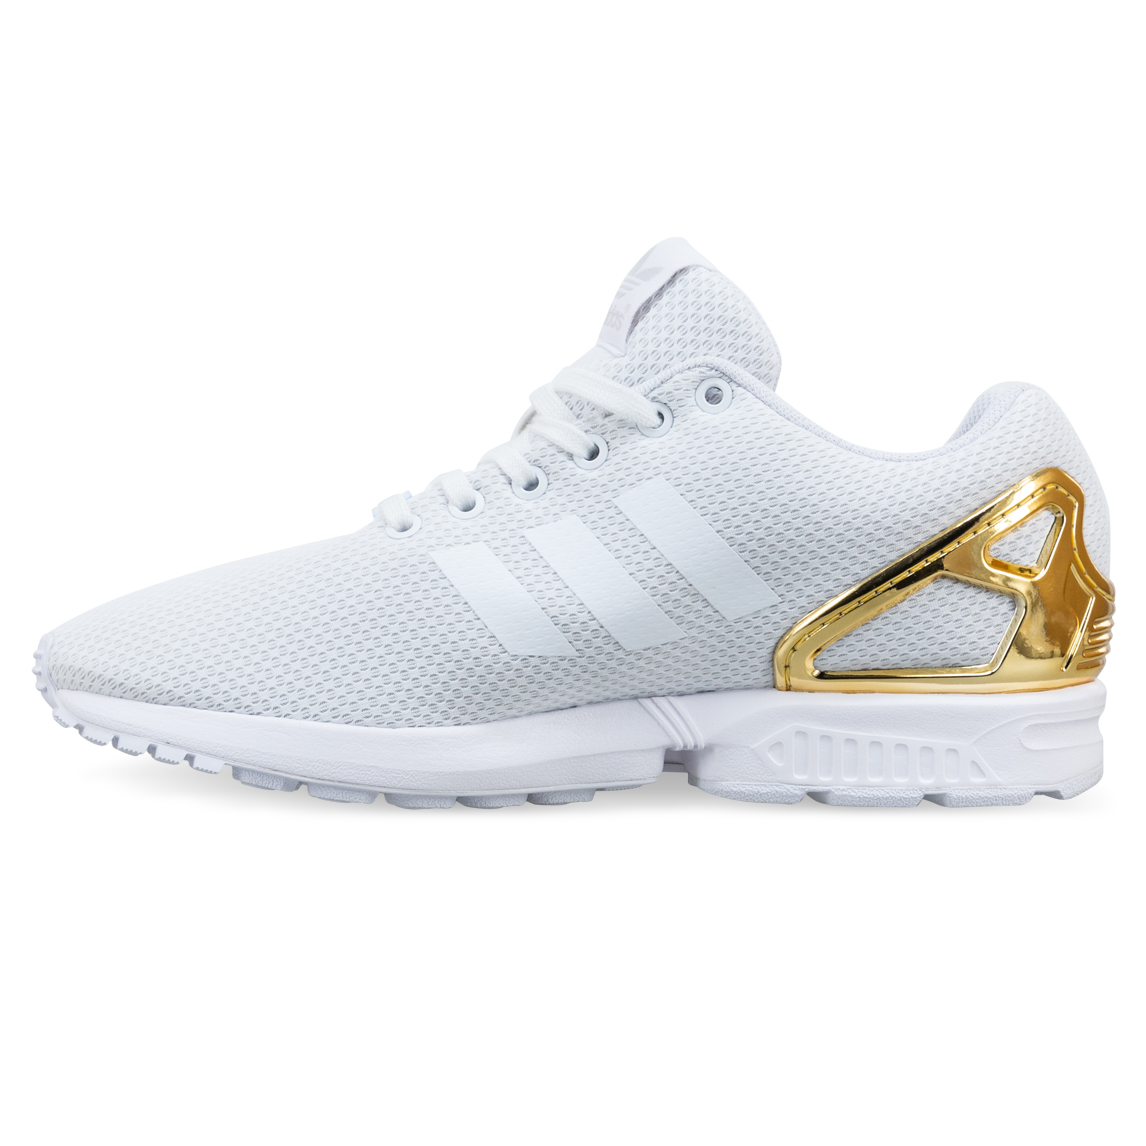 adidas flux white and gold